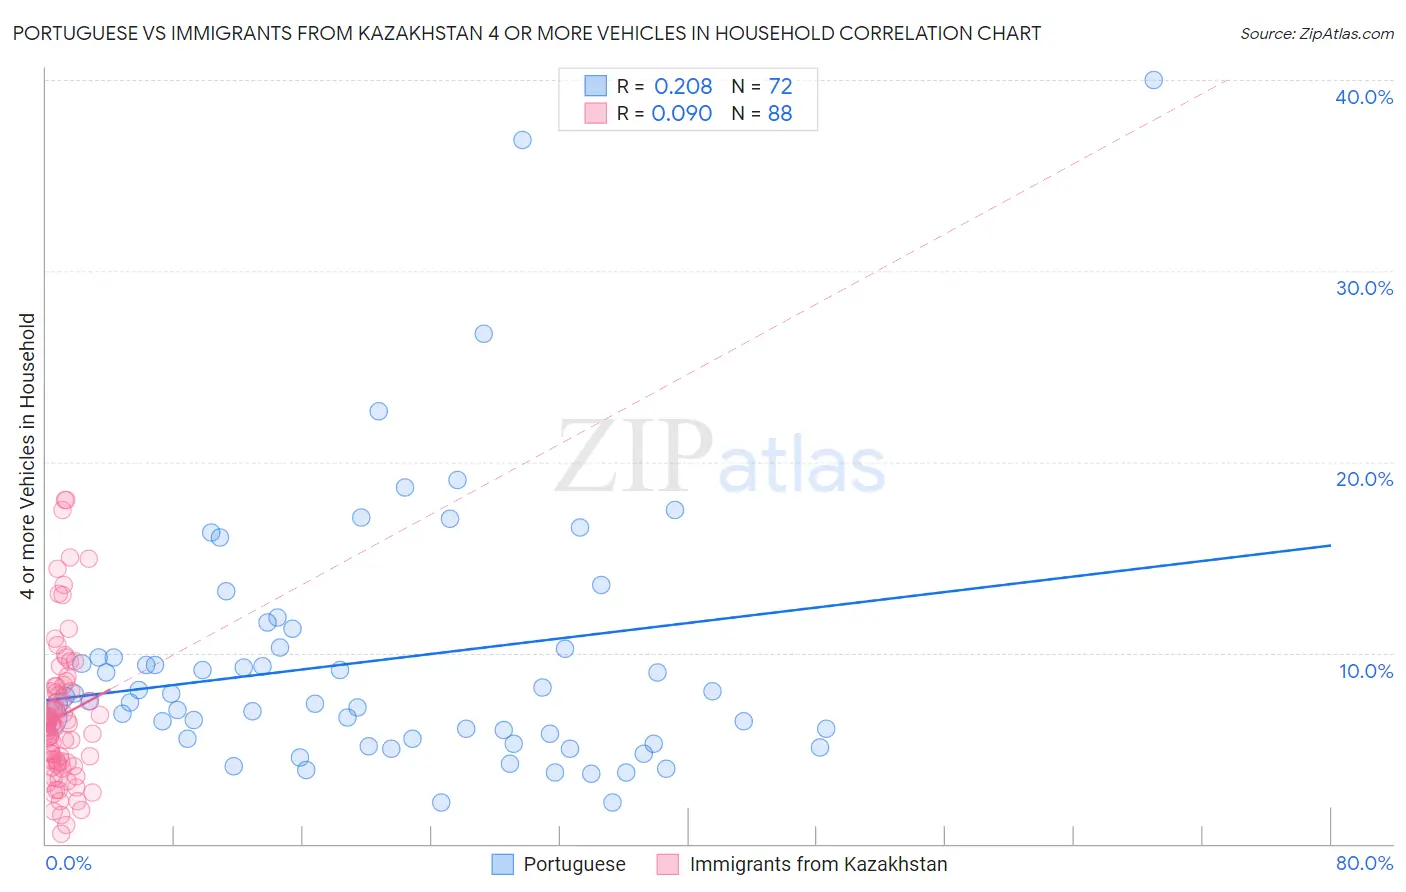 Portuguese vs Immigrants from Kazakhstan 4 or more Vehicles in Household